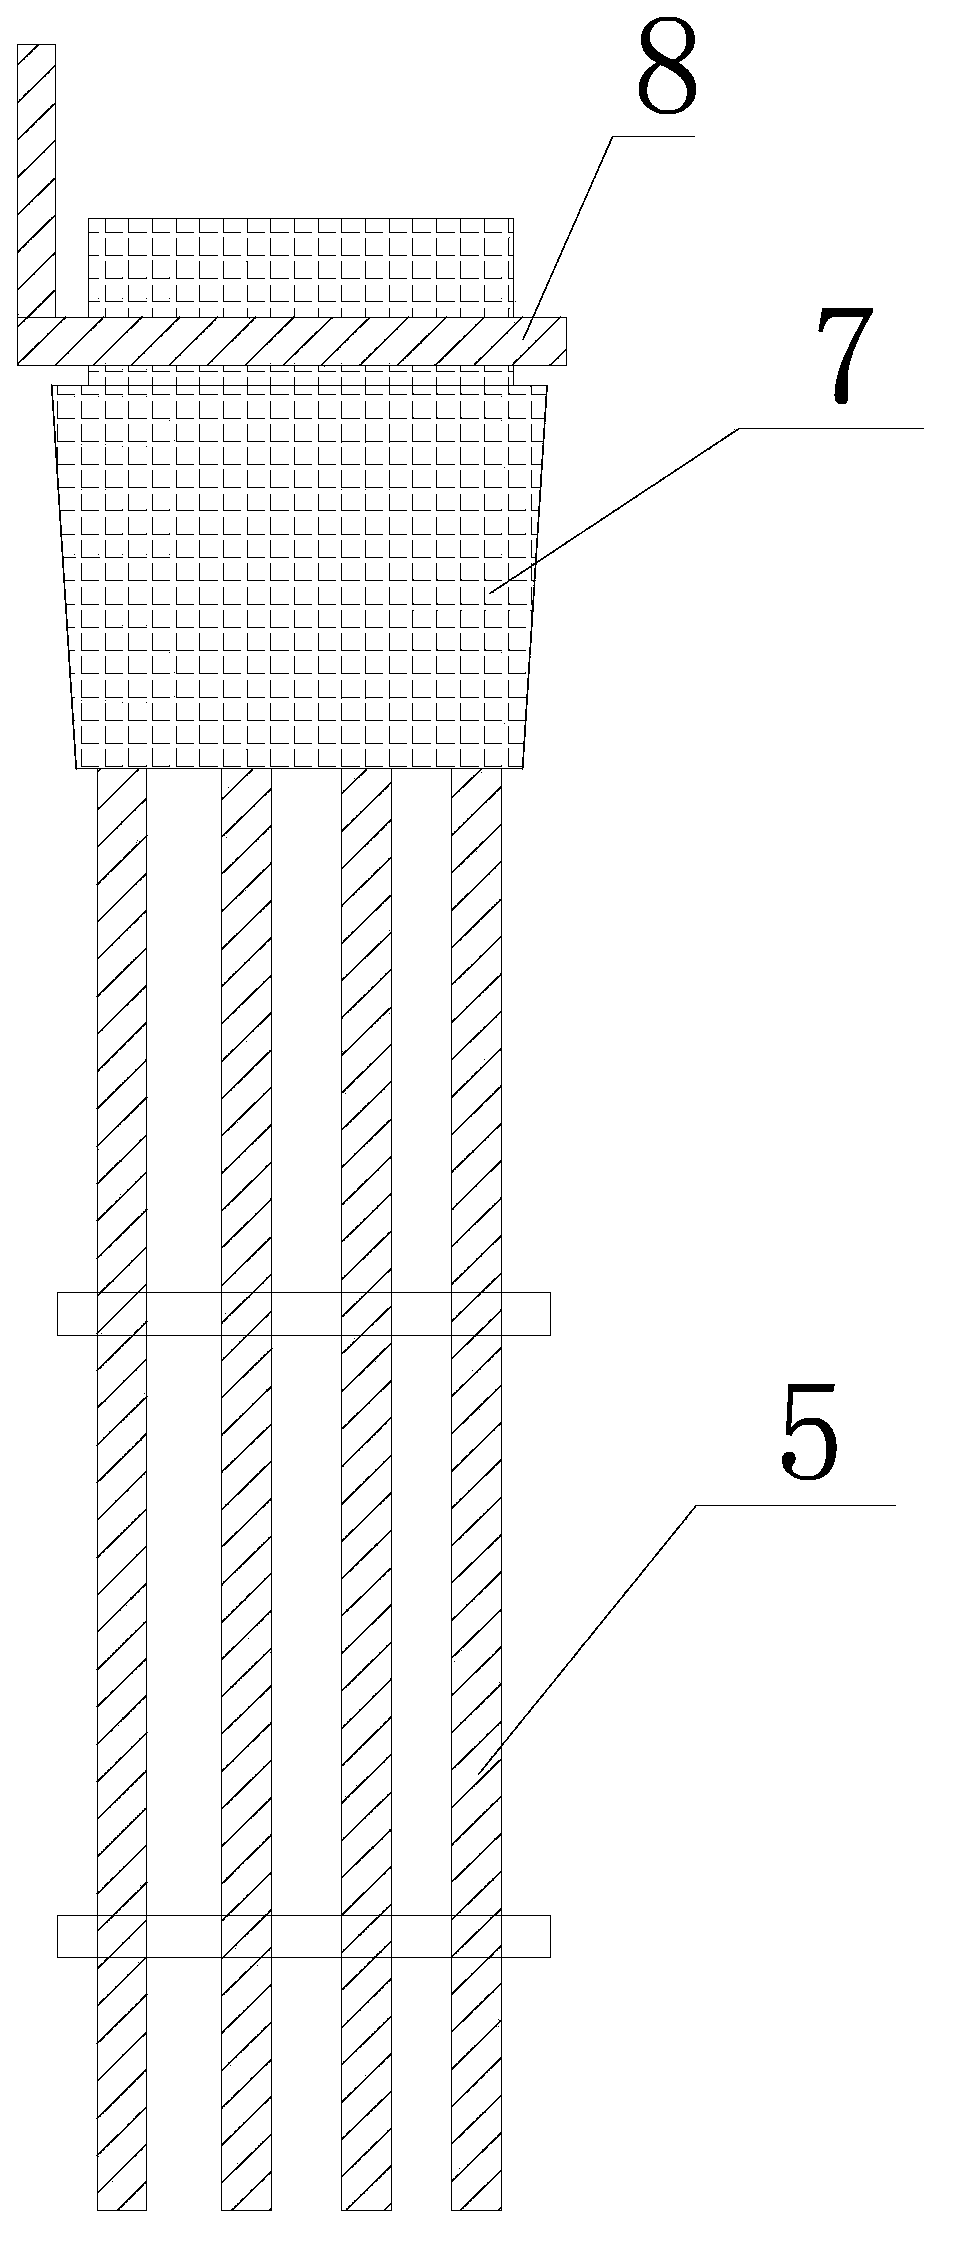 Perchlorate electrolyzer and electrolytic process